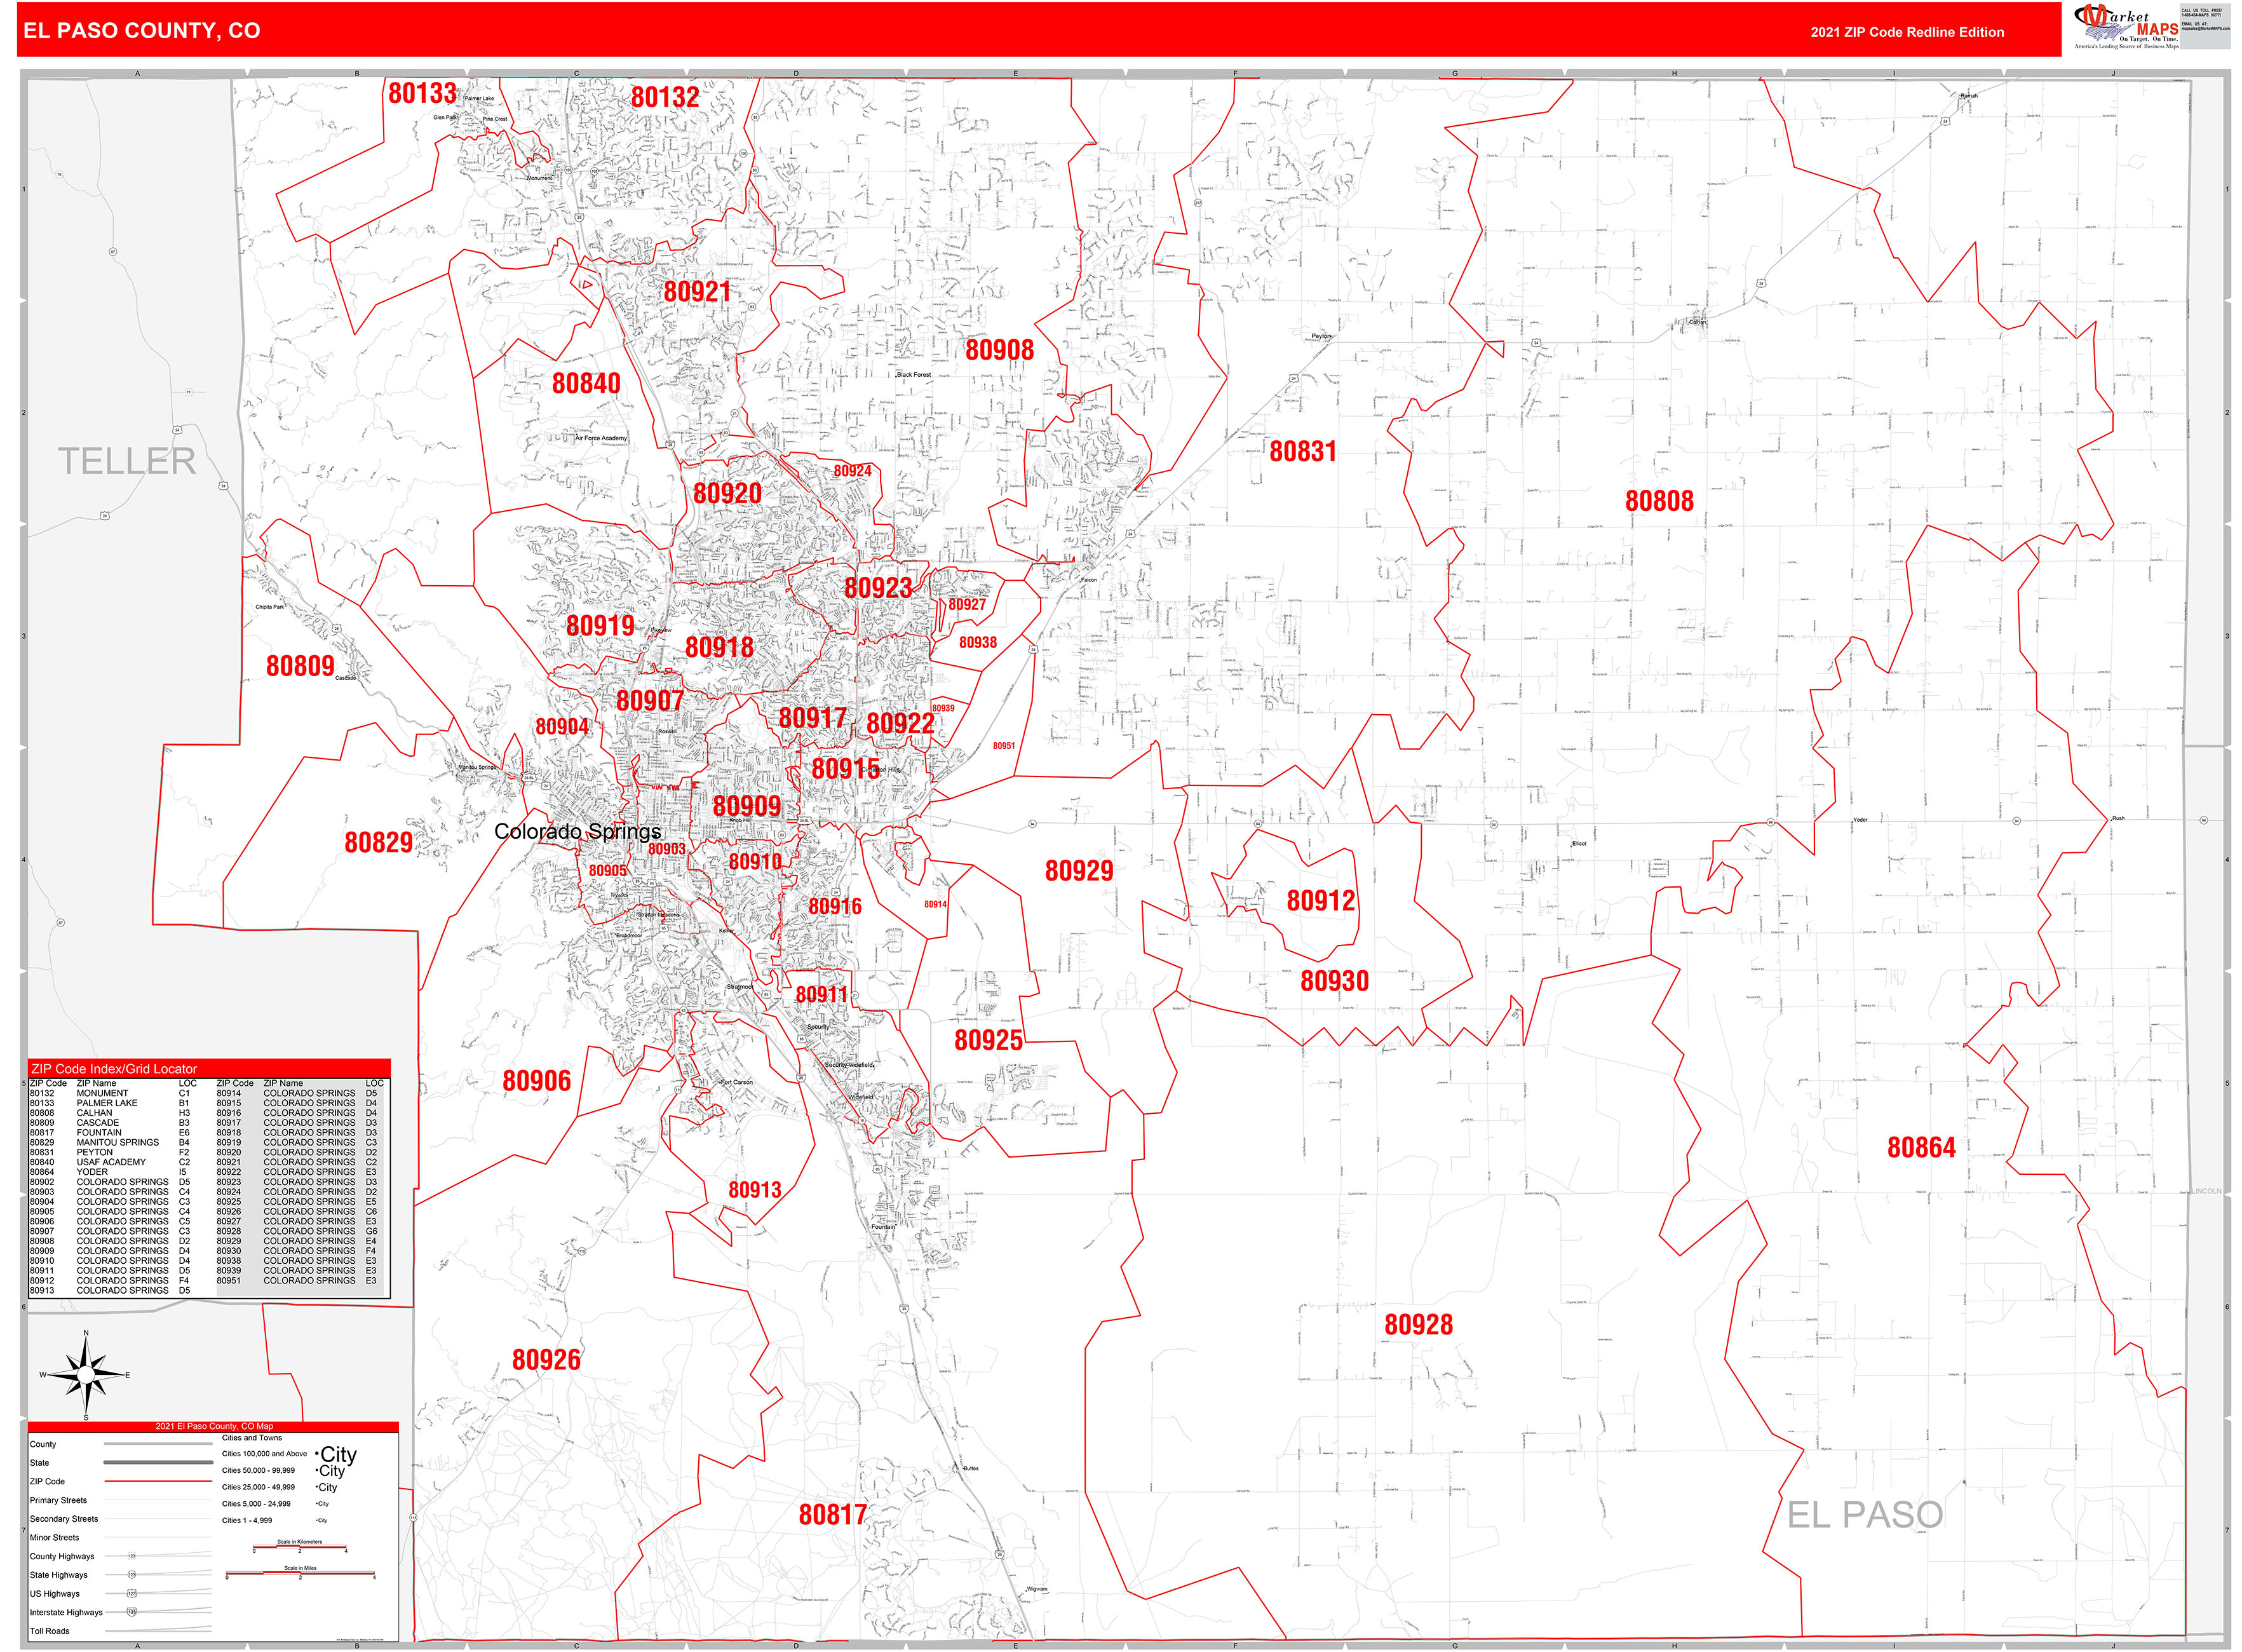 El Paso County Co Zip Code Wall Map Red Line Style By Marketmaps Mapsales 6293